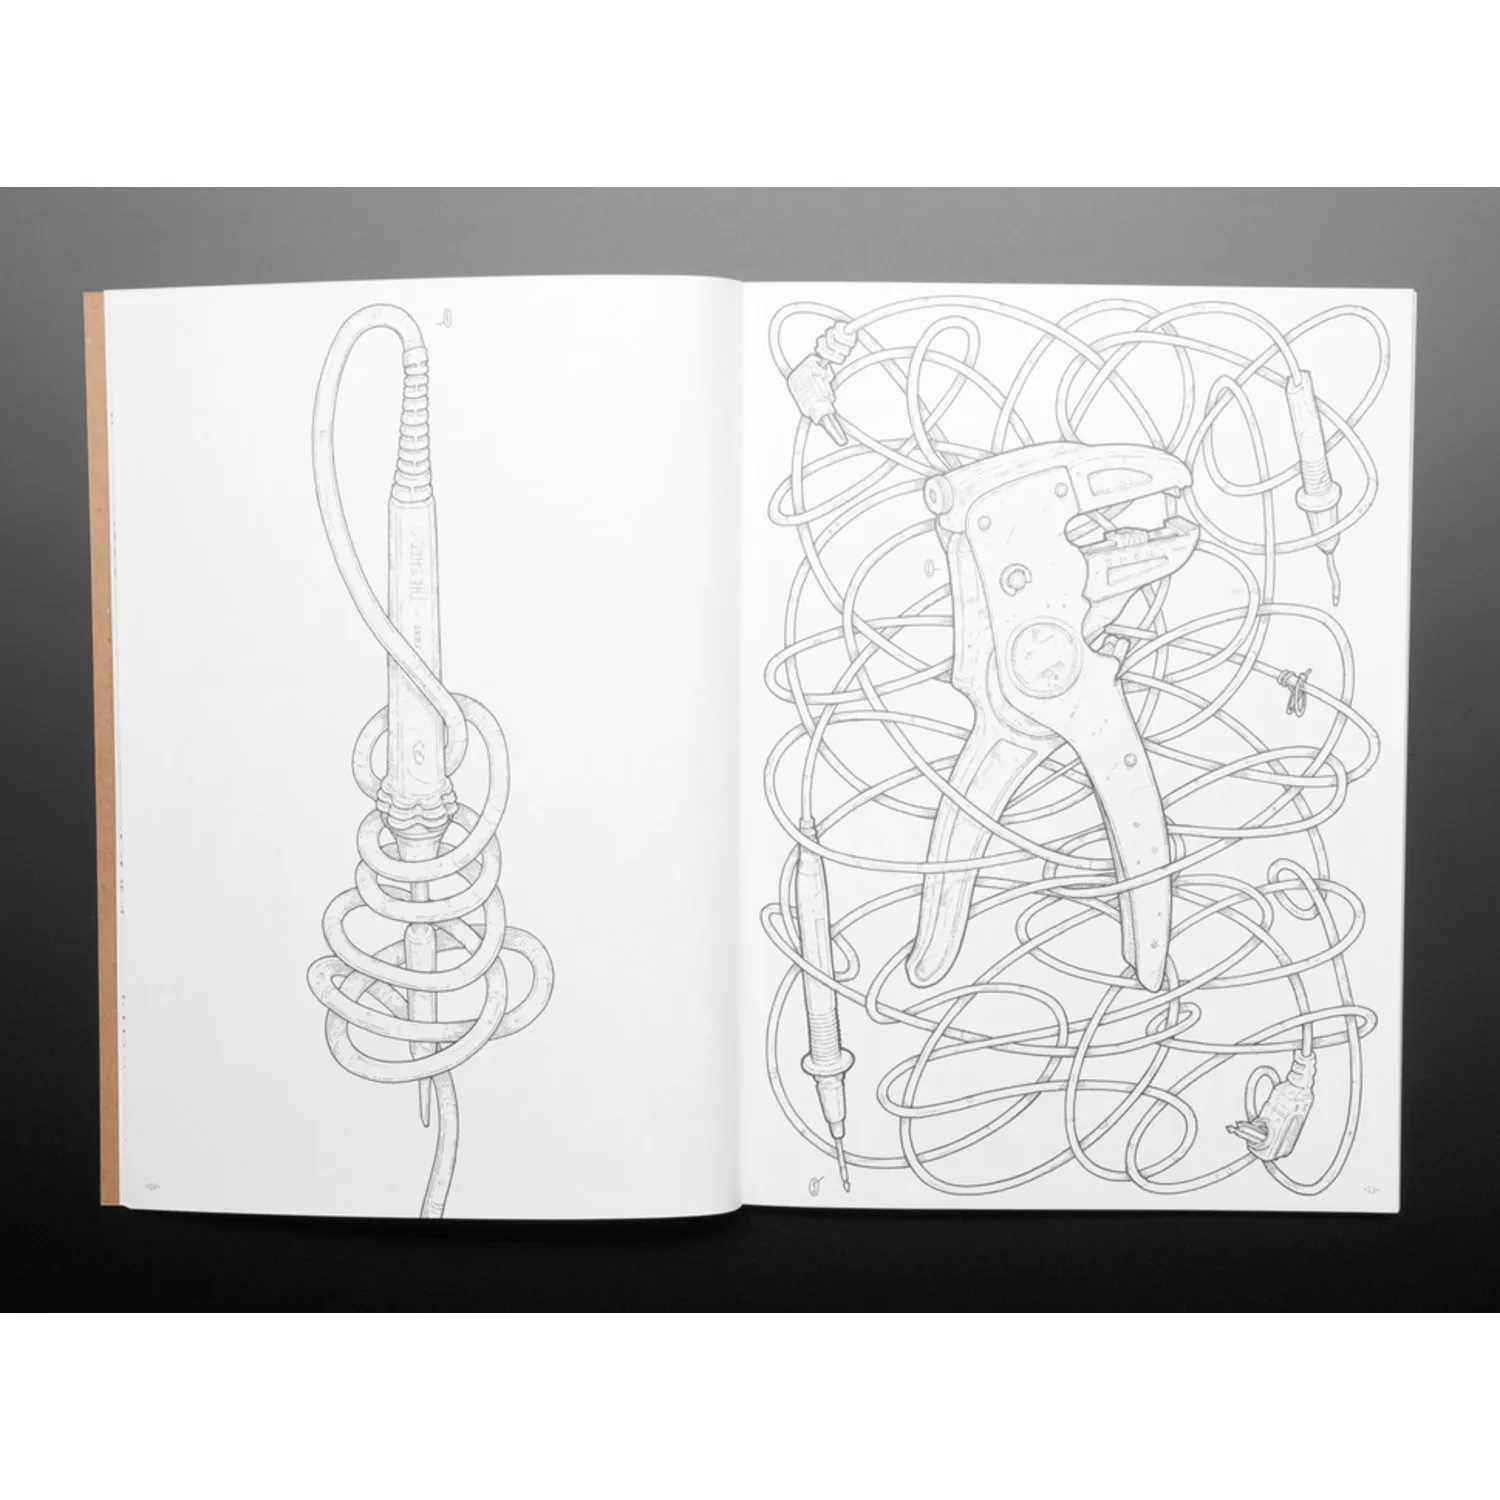 Photo of Toolshed Coloring Book - by Lee John Phillips